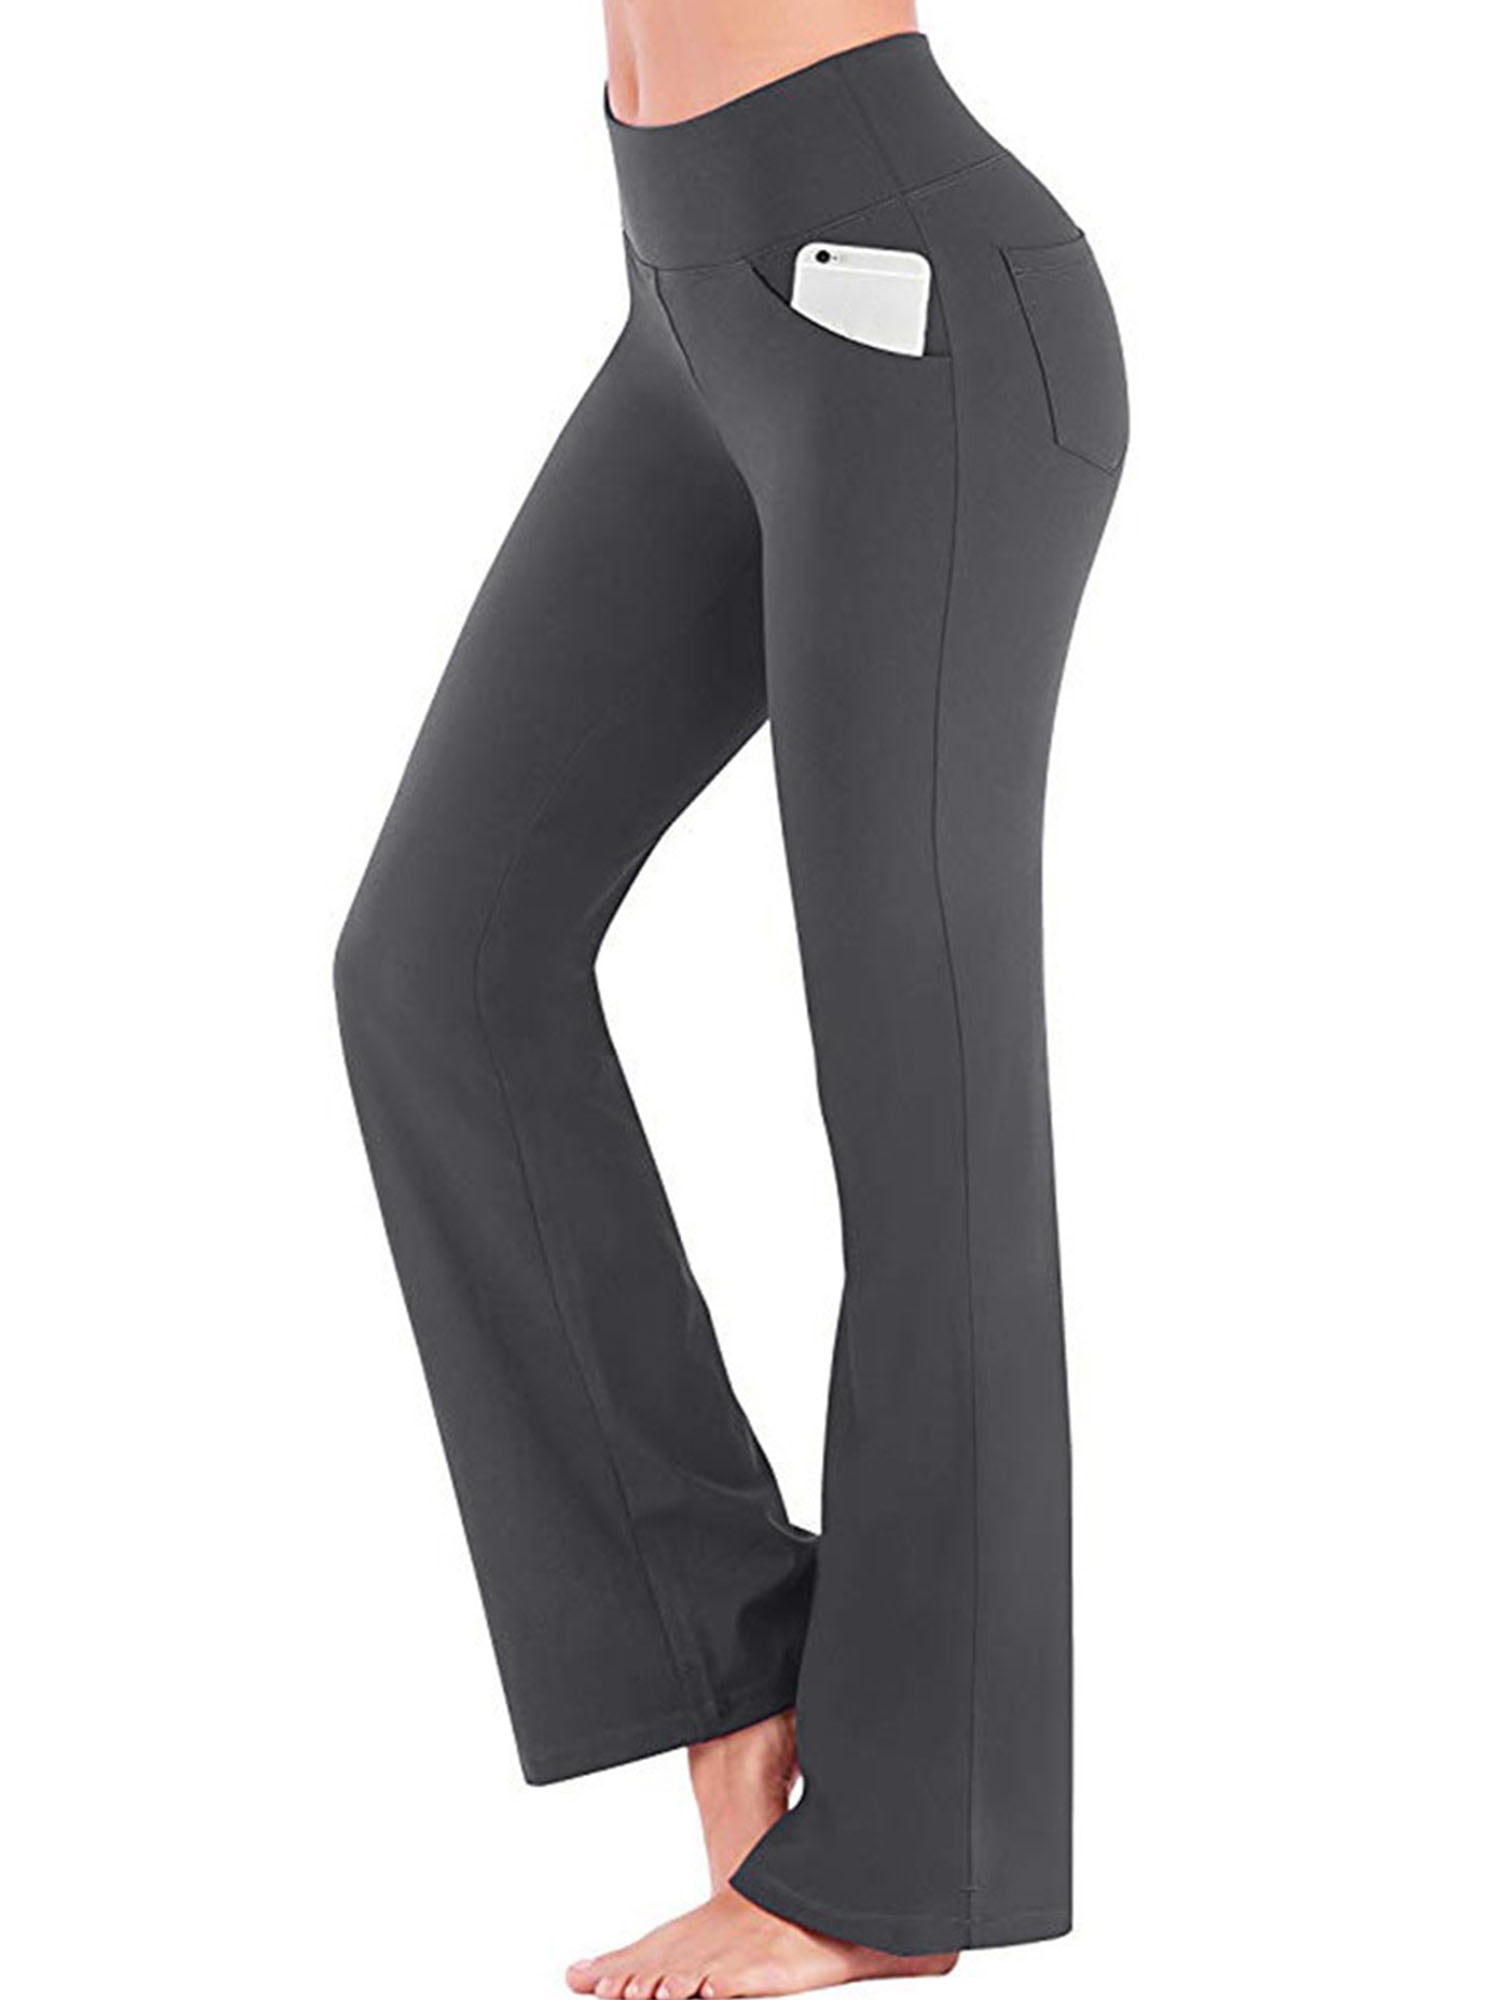 Avamo Bootcut Yoga Leggings Activewear Pocket for Women Lady High Waisted  Workout Lounge Work Dress Flare Stretch Pants Bell Bottom Plus Size 